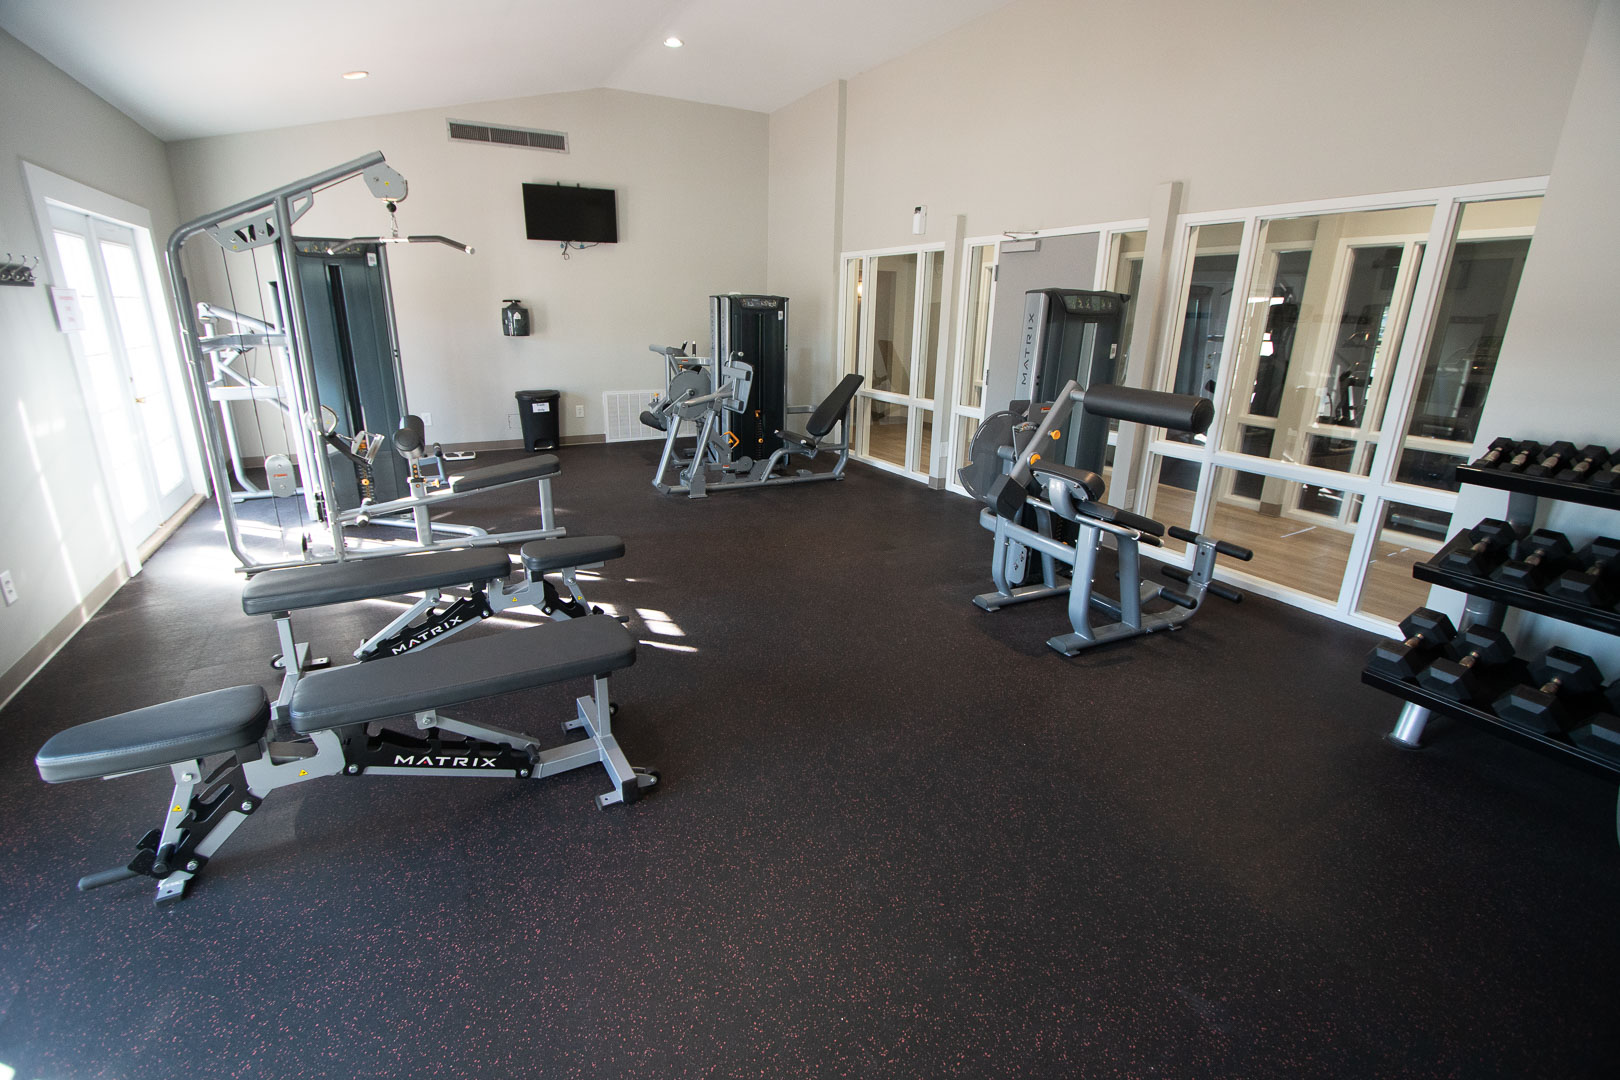 A fully equipped exercise room at VRI's Sandcastle Cove in New Bern, North Carolina.